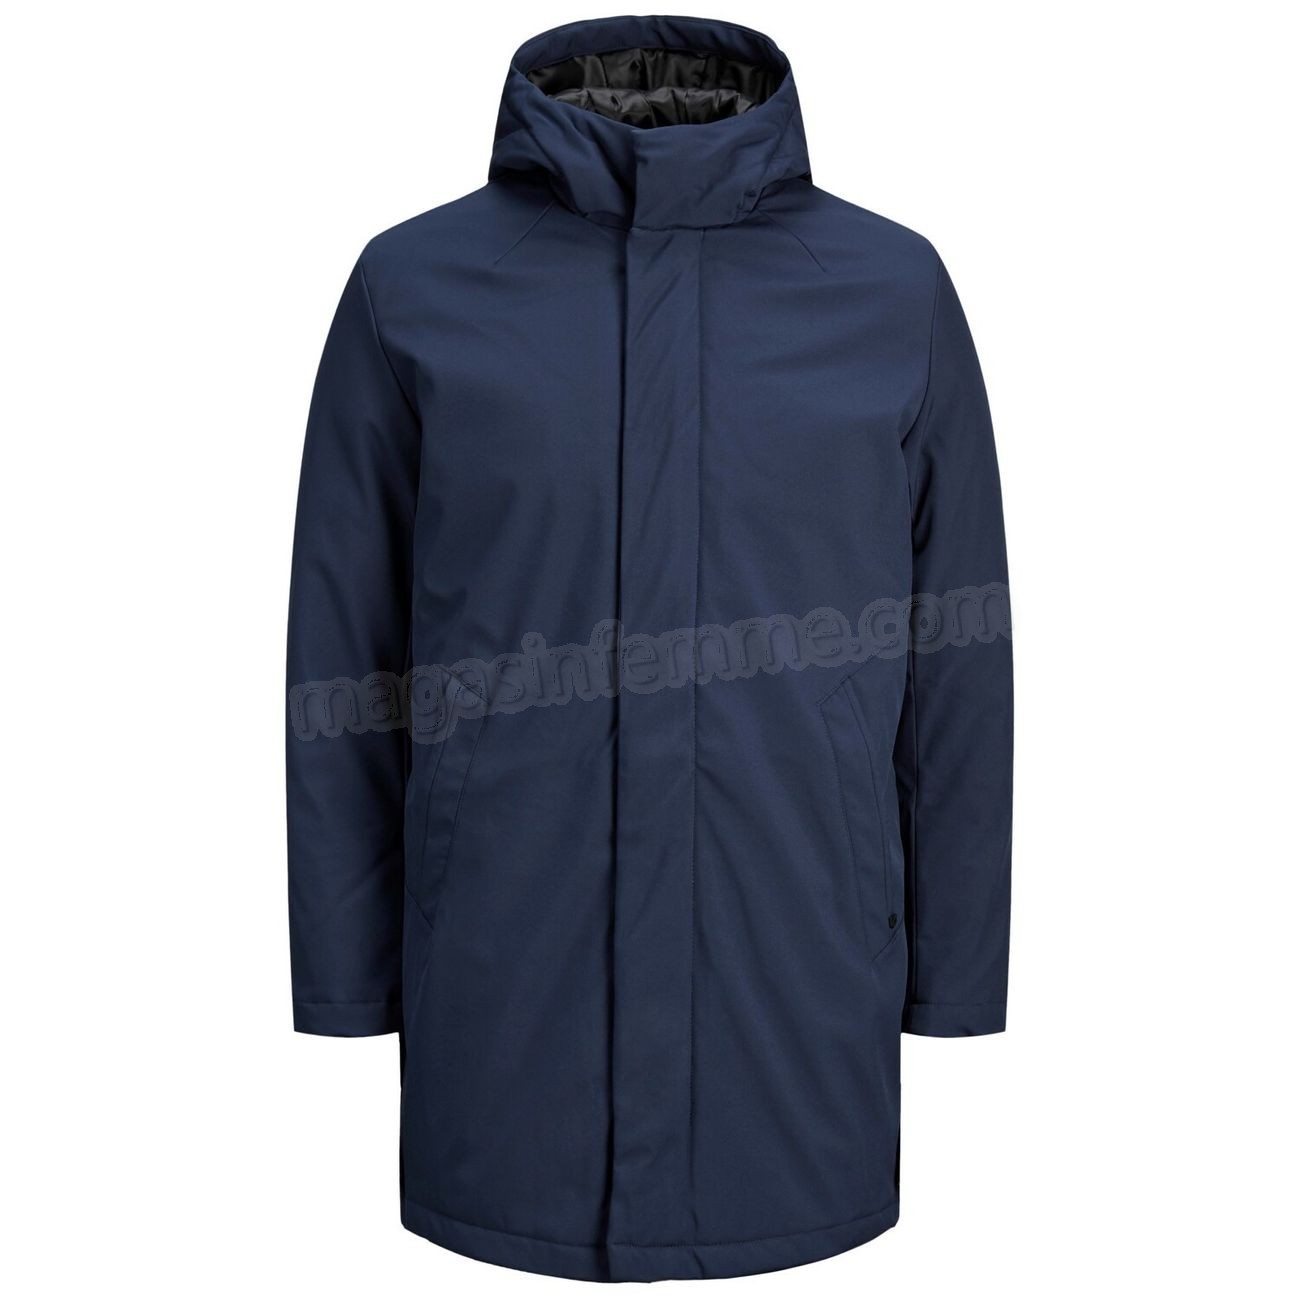 Jack And Jones-Mode- Lifestyle homme JACK AND JONES Parka Jack & Jones Climb en solde - Jack And Jones-Mode- Lifestyle homme JACK AND JONES Parka Jack & Jones Climb en solde